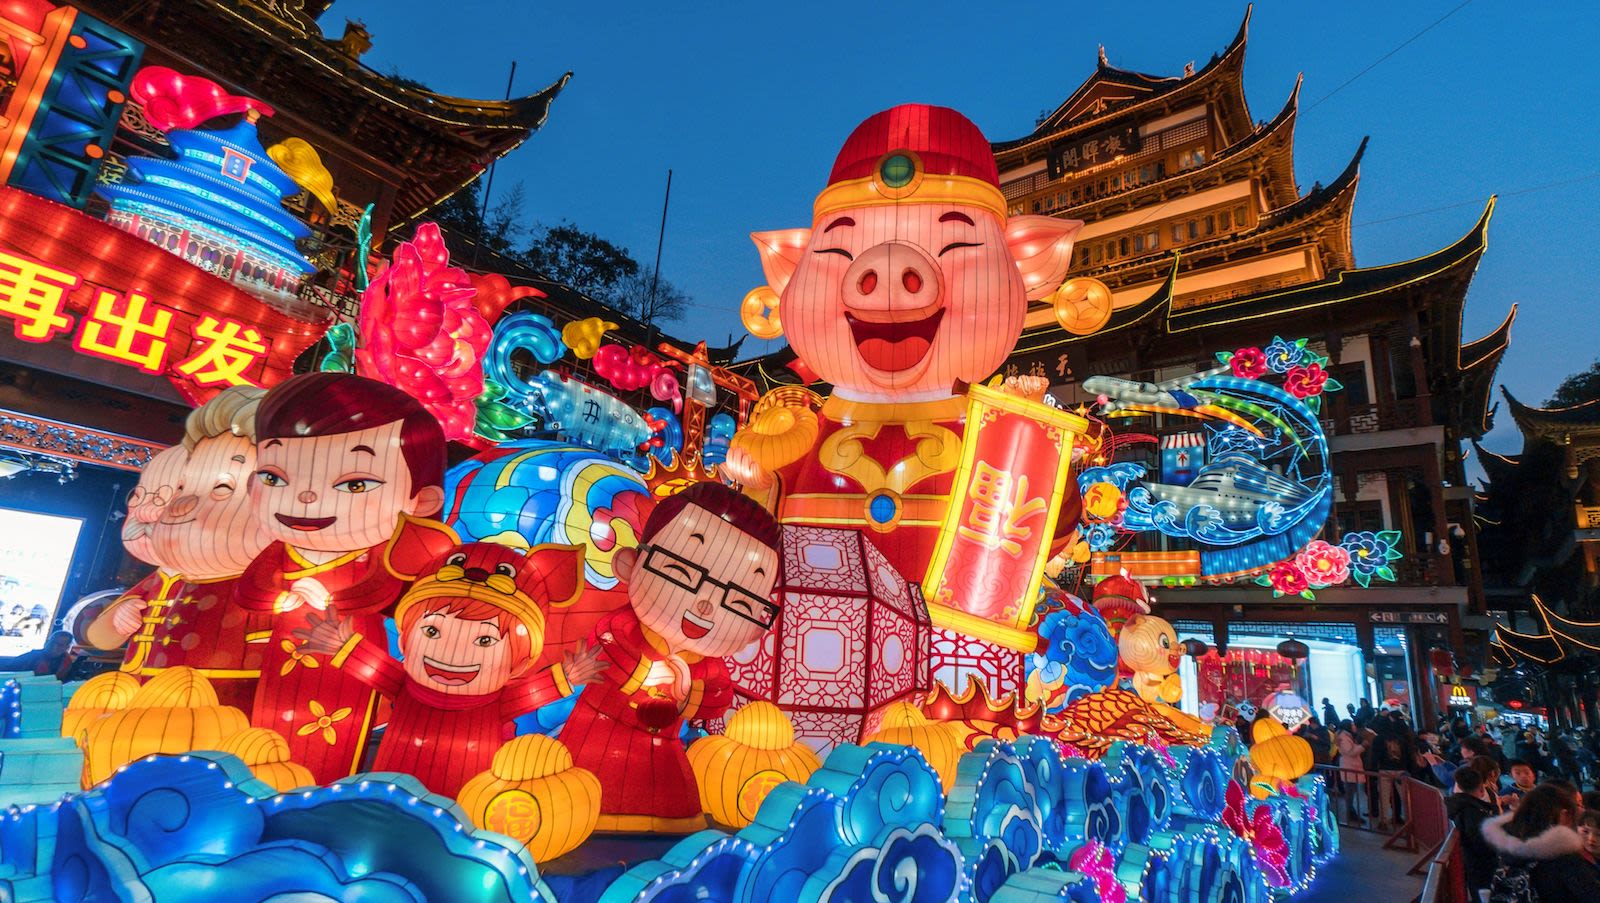 CHINESE LUNAR NEW YEAR'S DAY - February 10, 2024 - National Today